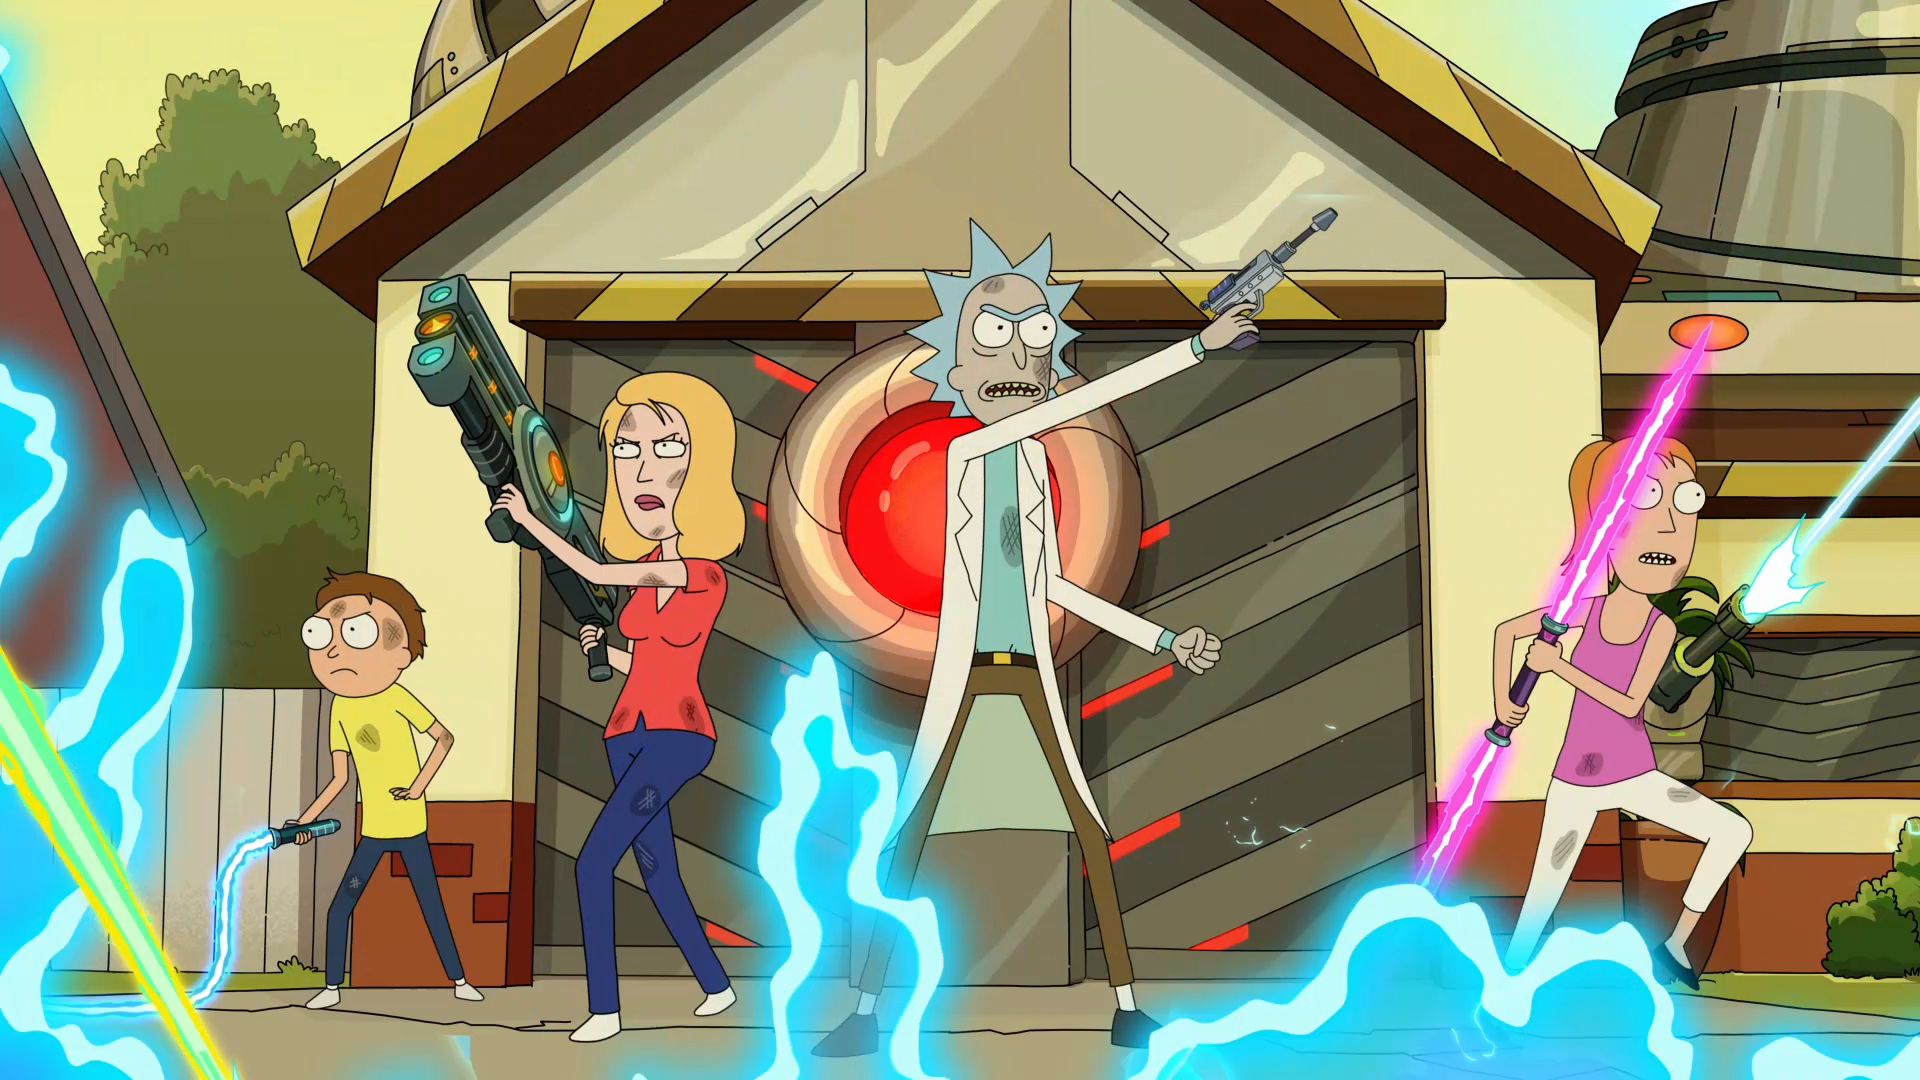 Rick And Morty Season 5 Trailer #2 Dropped This Weekend